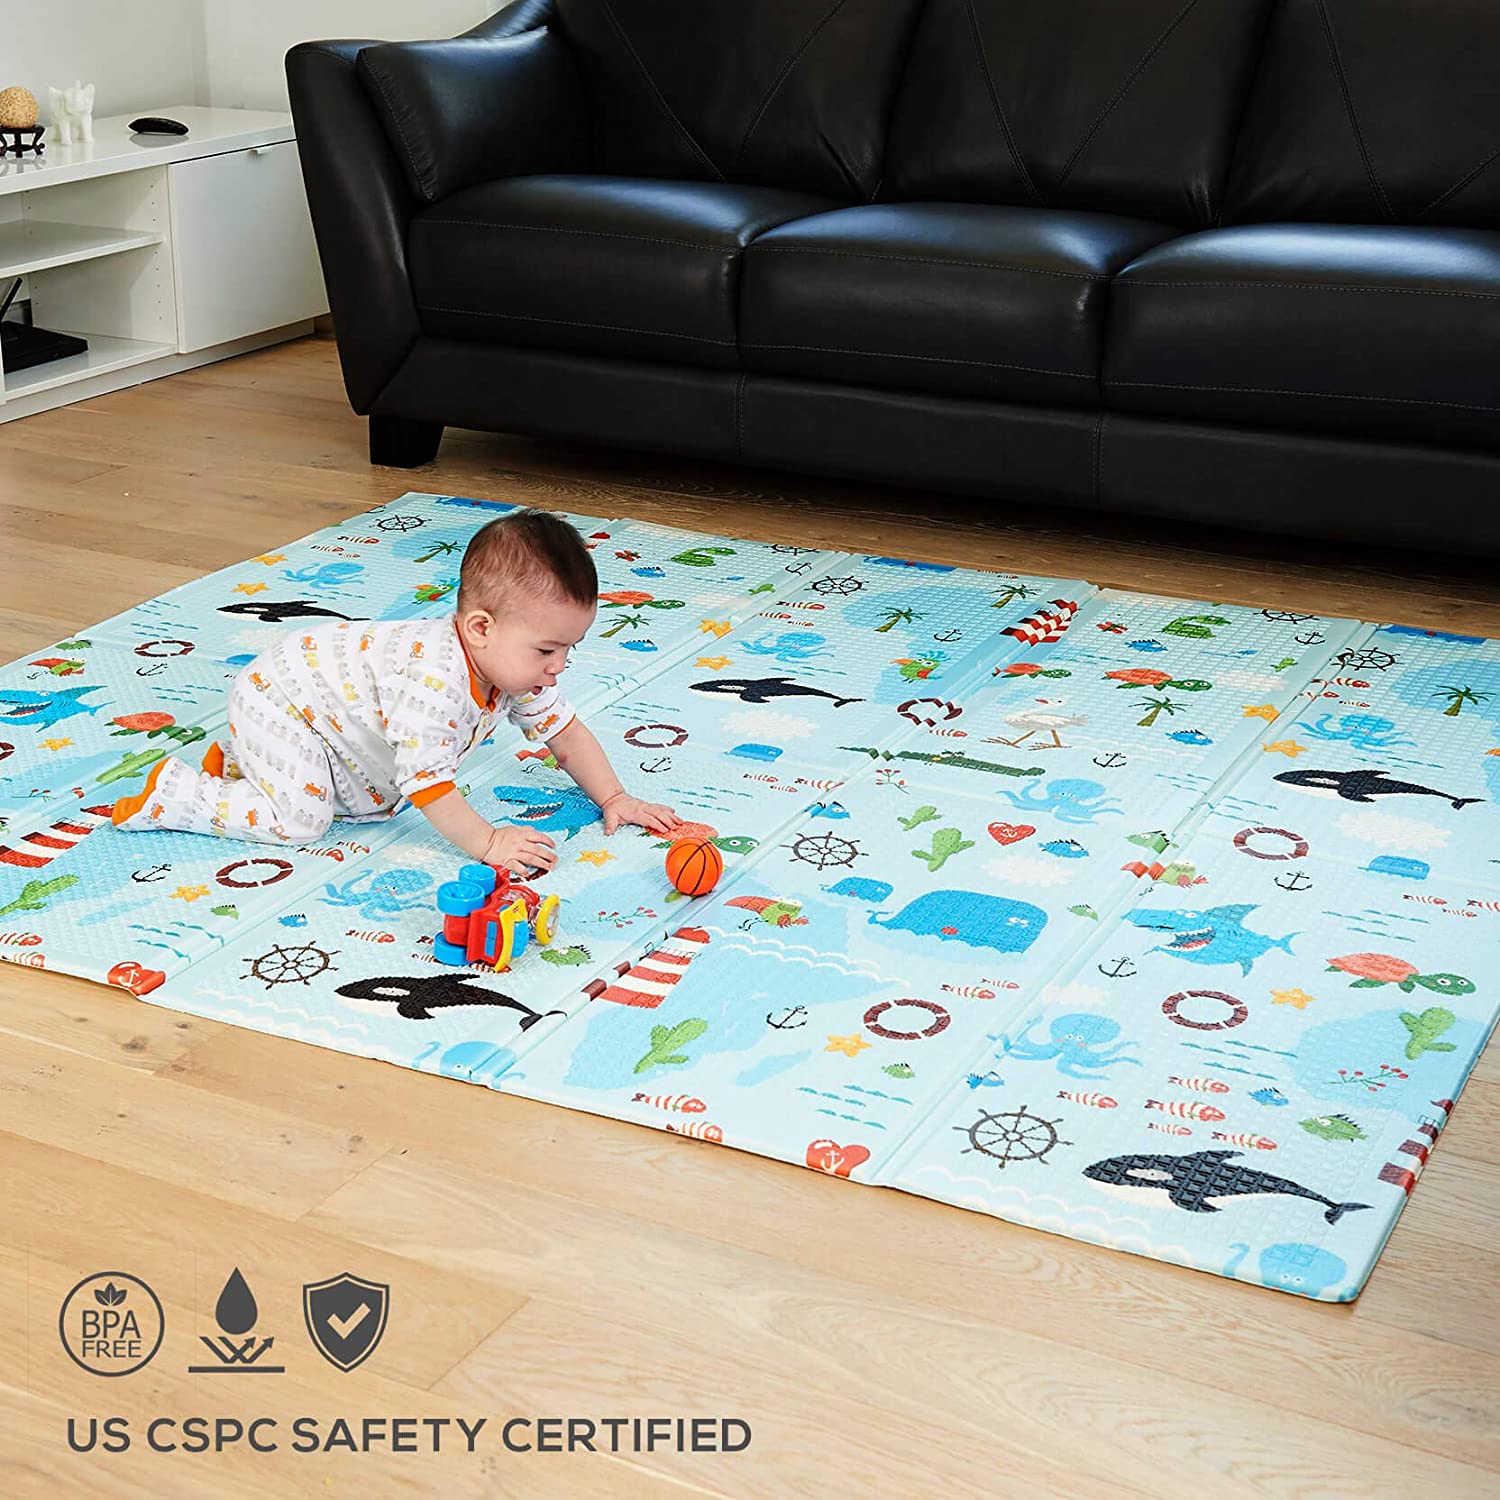 XDEMODA Baby Play Mat & Exercise Mat Extra Large Waterproof Foam Play Mat for Baby Reversible & Foldable Design Large Foam Mat for Baby Crawling or Adults Yoga 79x71x0.6in 